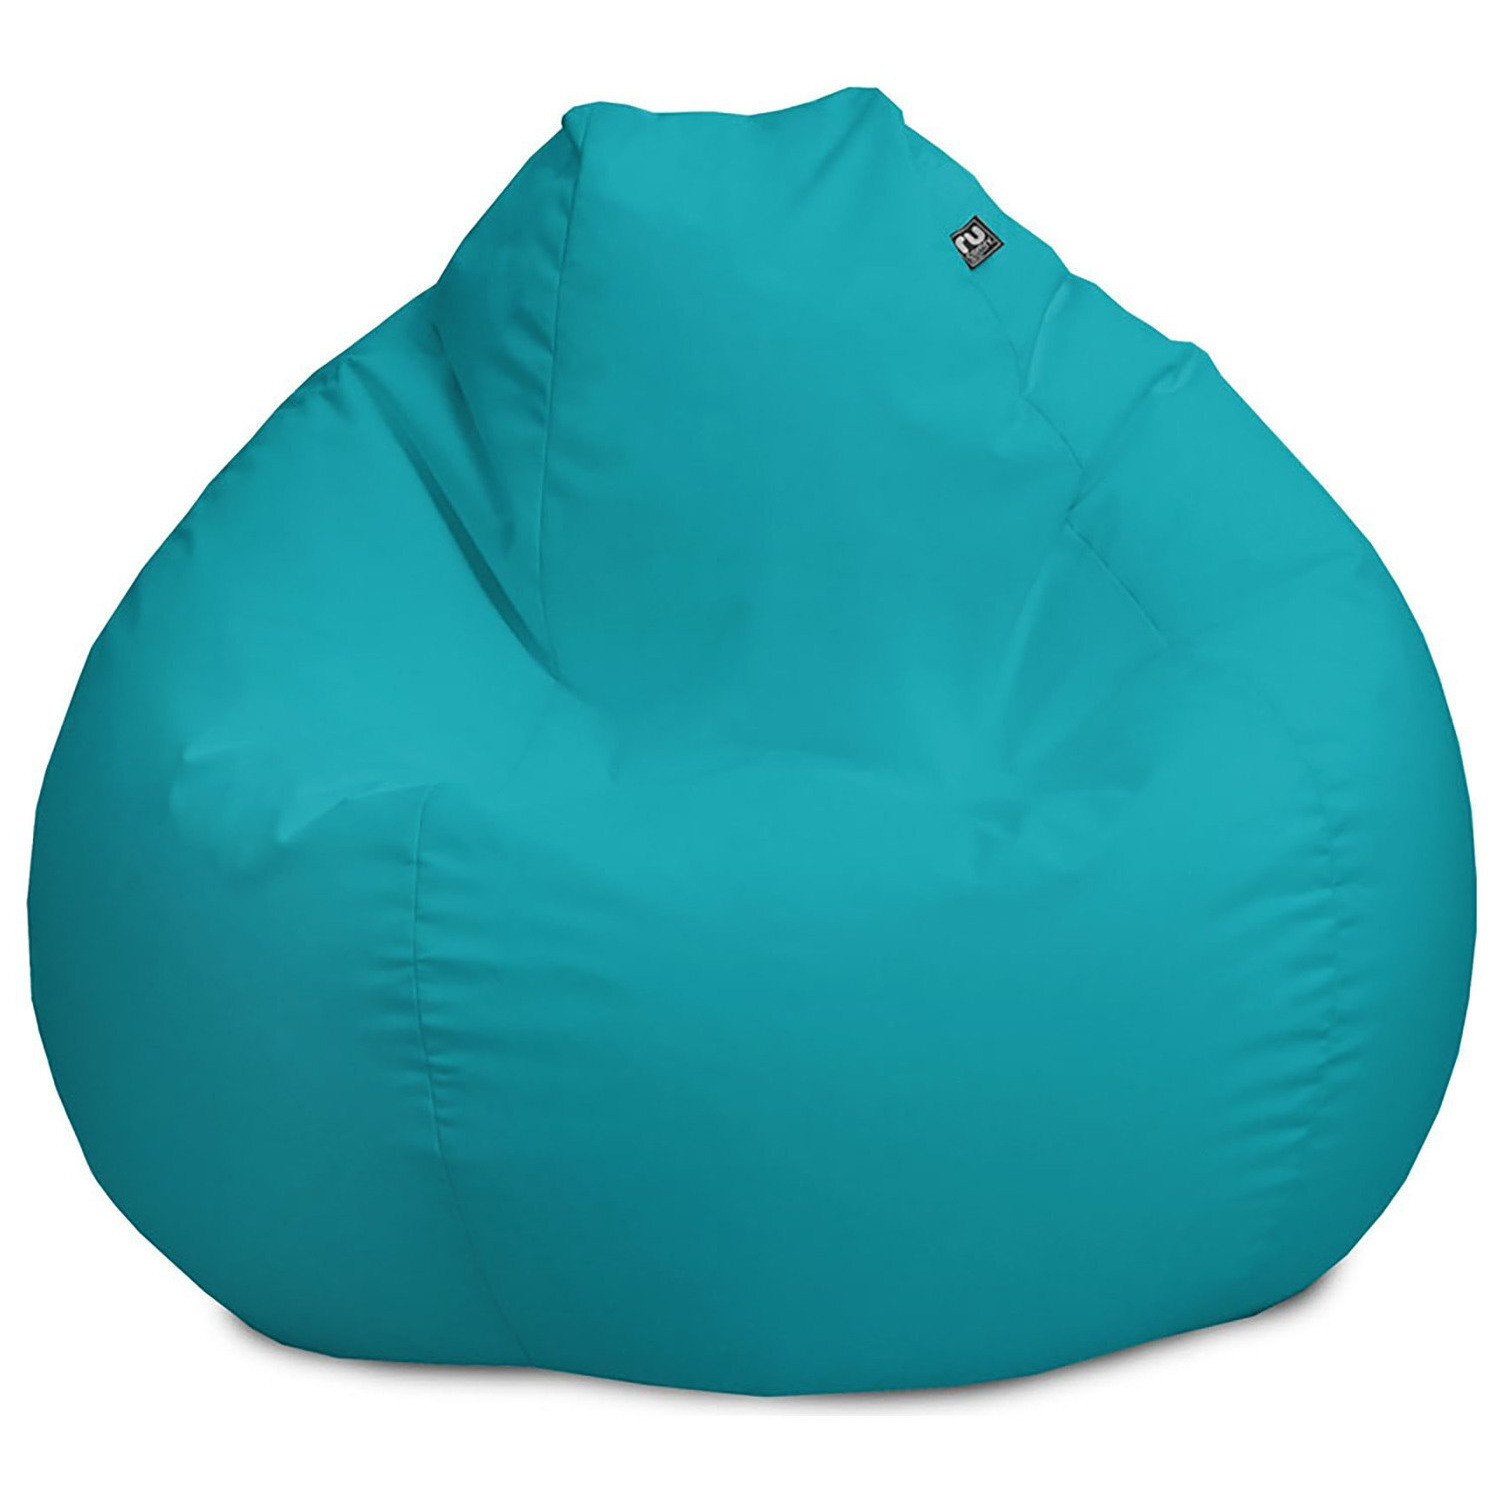 rucomfy Indoor Outdoor Bean Bag - Turquoise - image 1